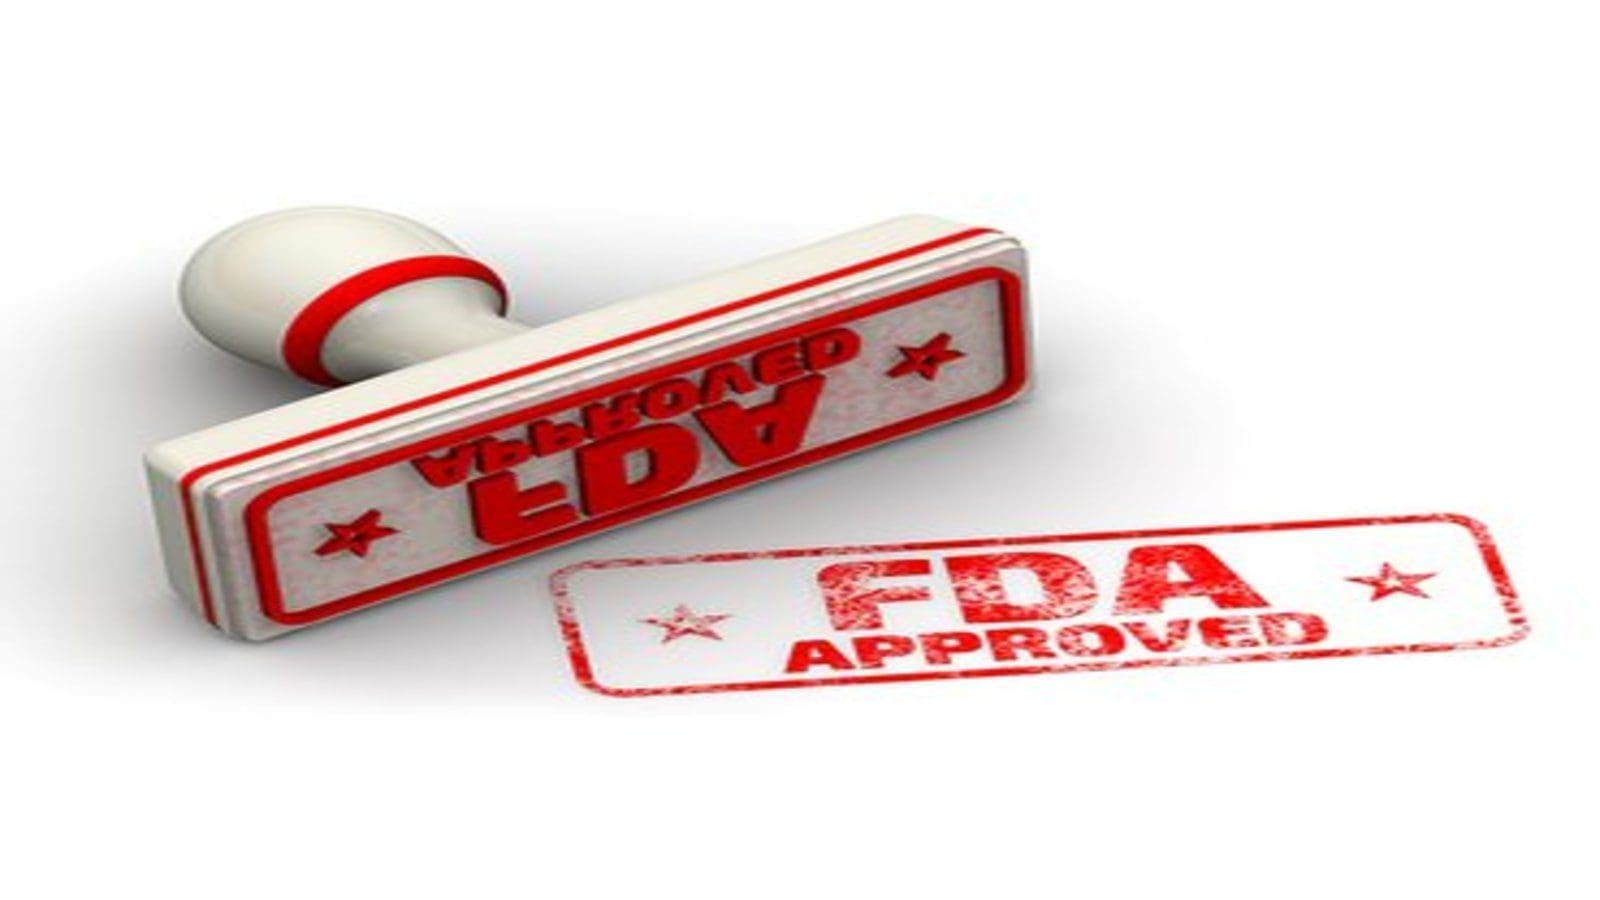 FDA publishes Export Certification Guidance to ascertain credibility of U.S exports